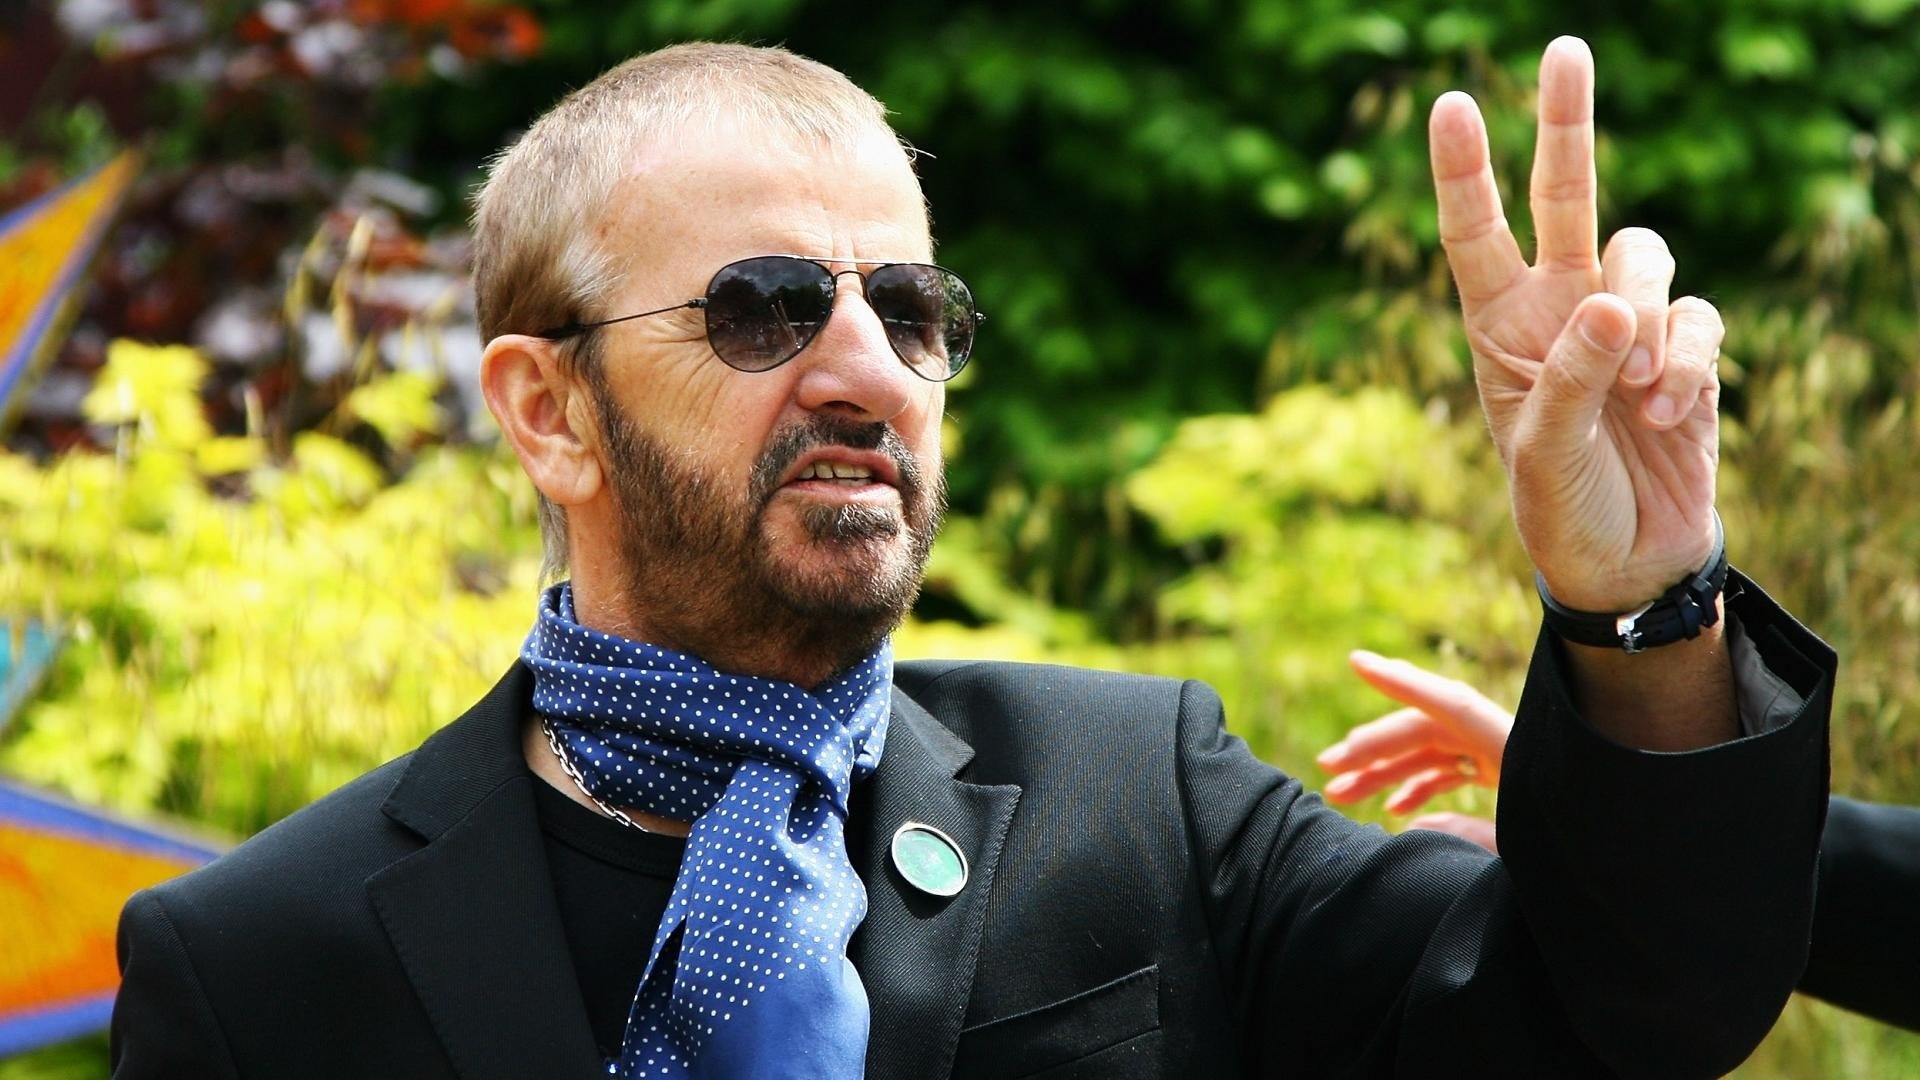 Ringo Starr, High-definition wallpapers, Striking visuals, Background images, 1920x1080 Full HD Desktop